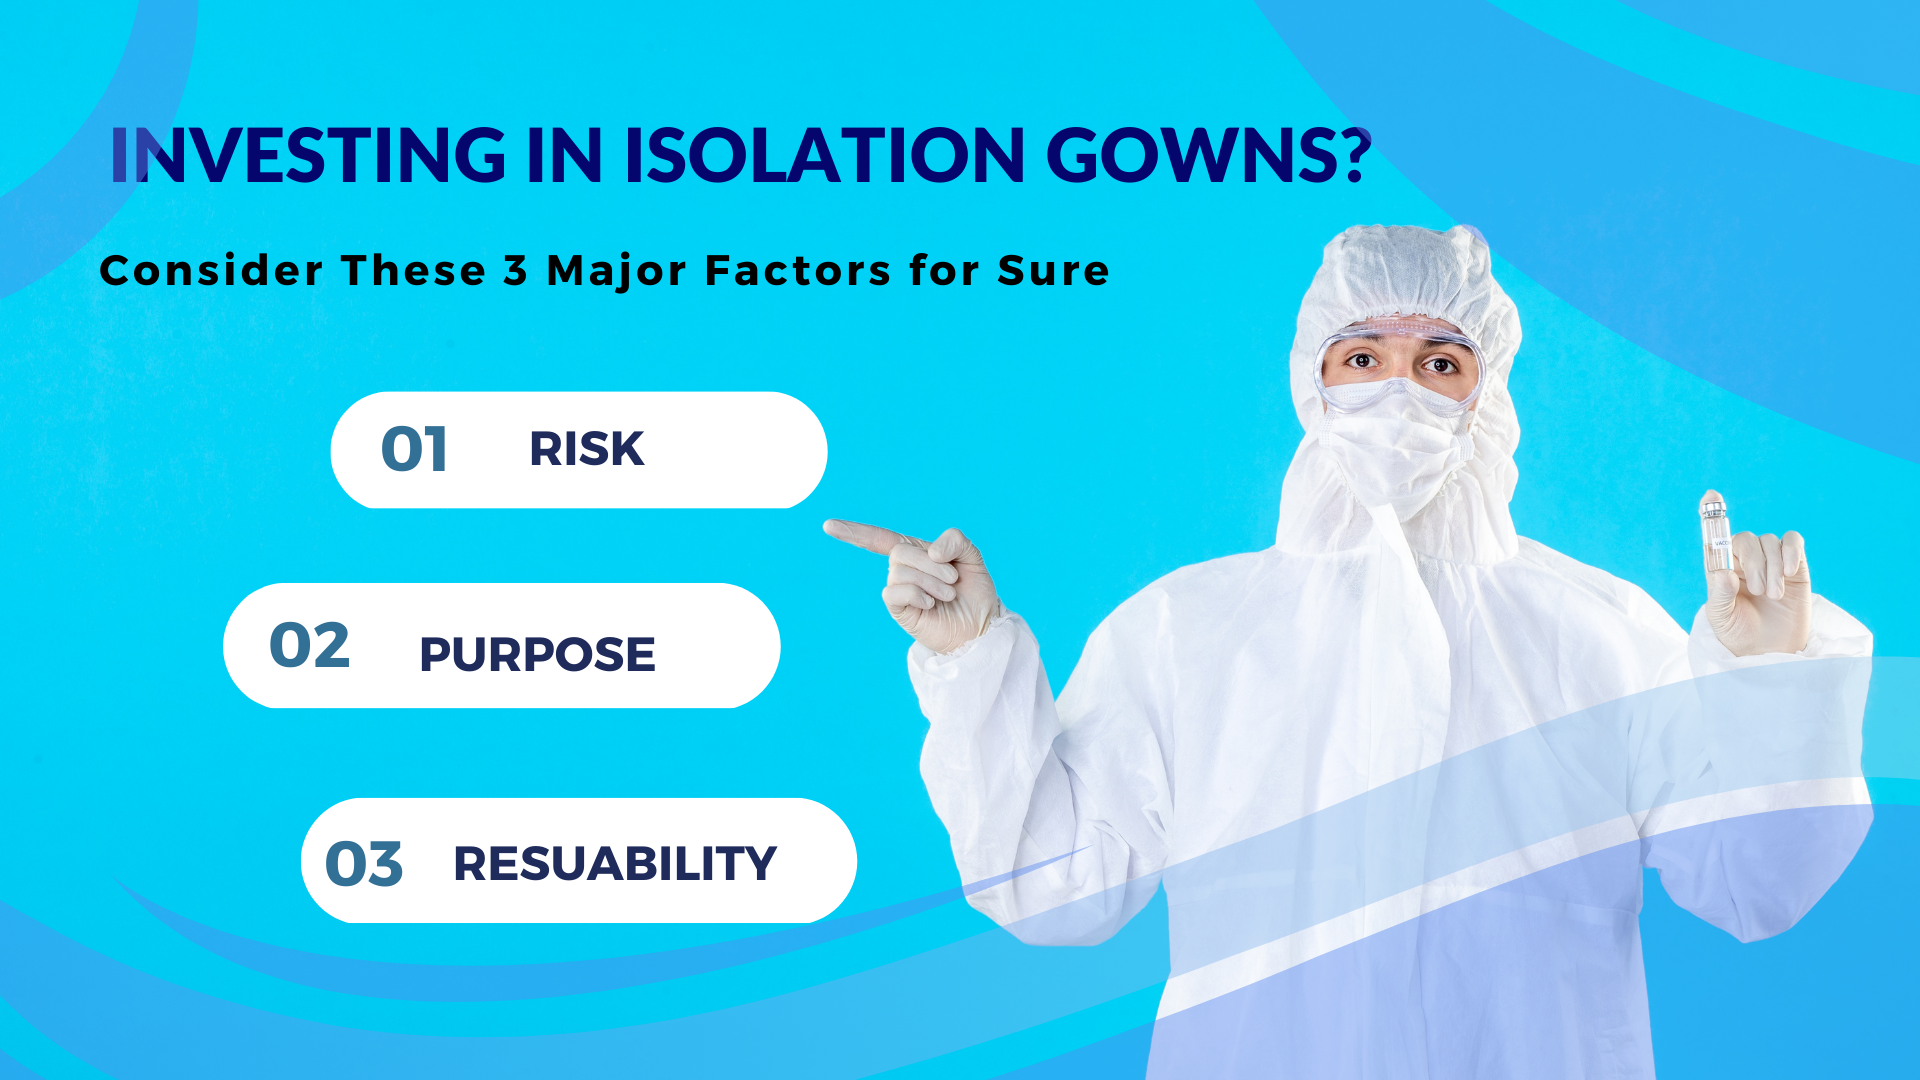 How to Buy Quality Isolation Gowns - 8 Health